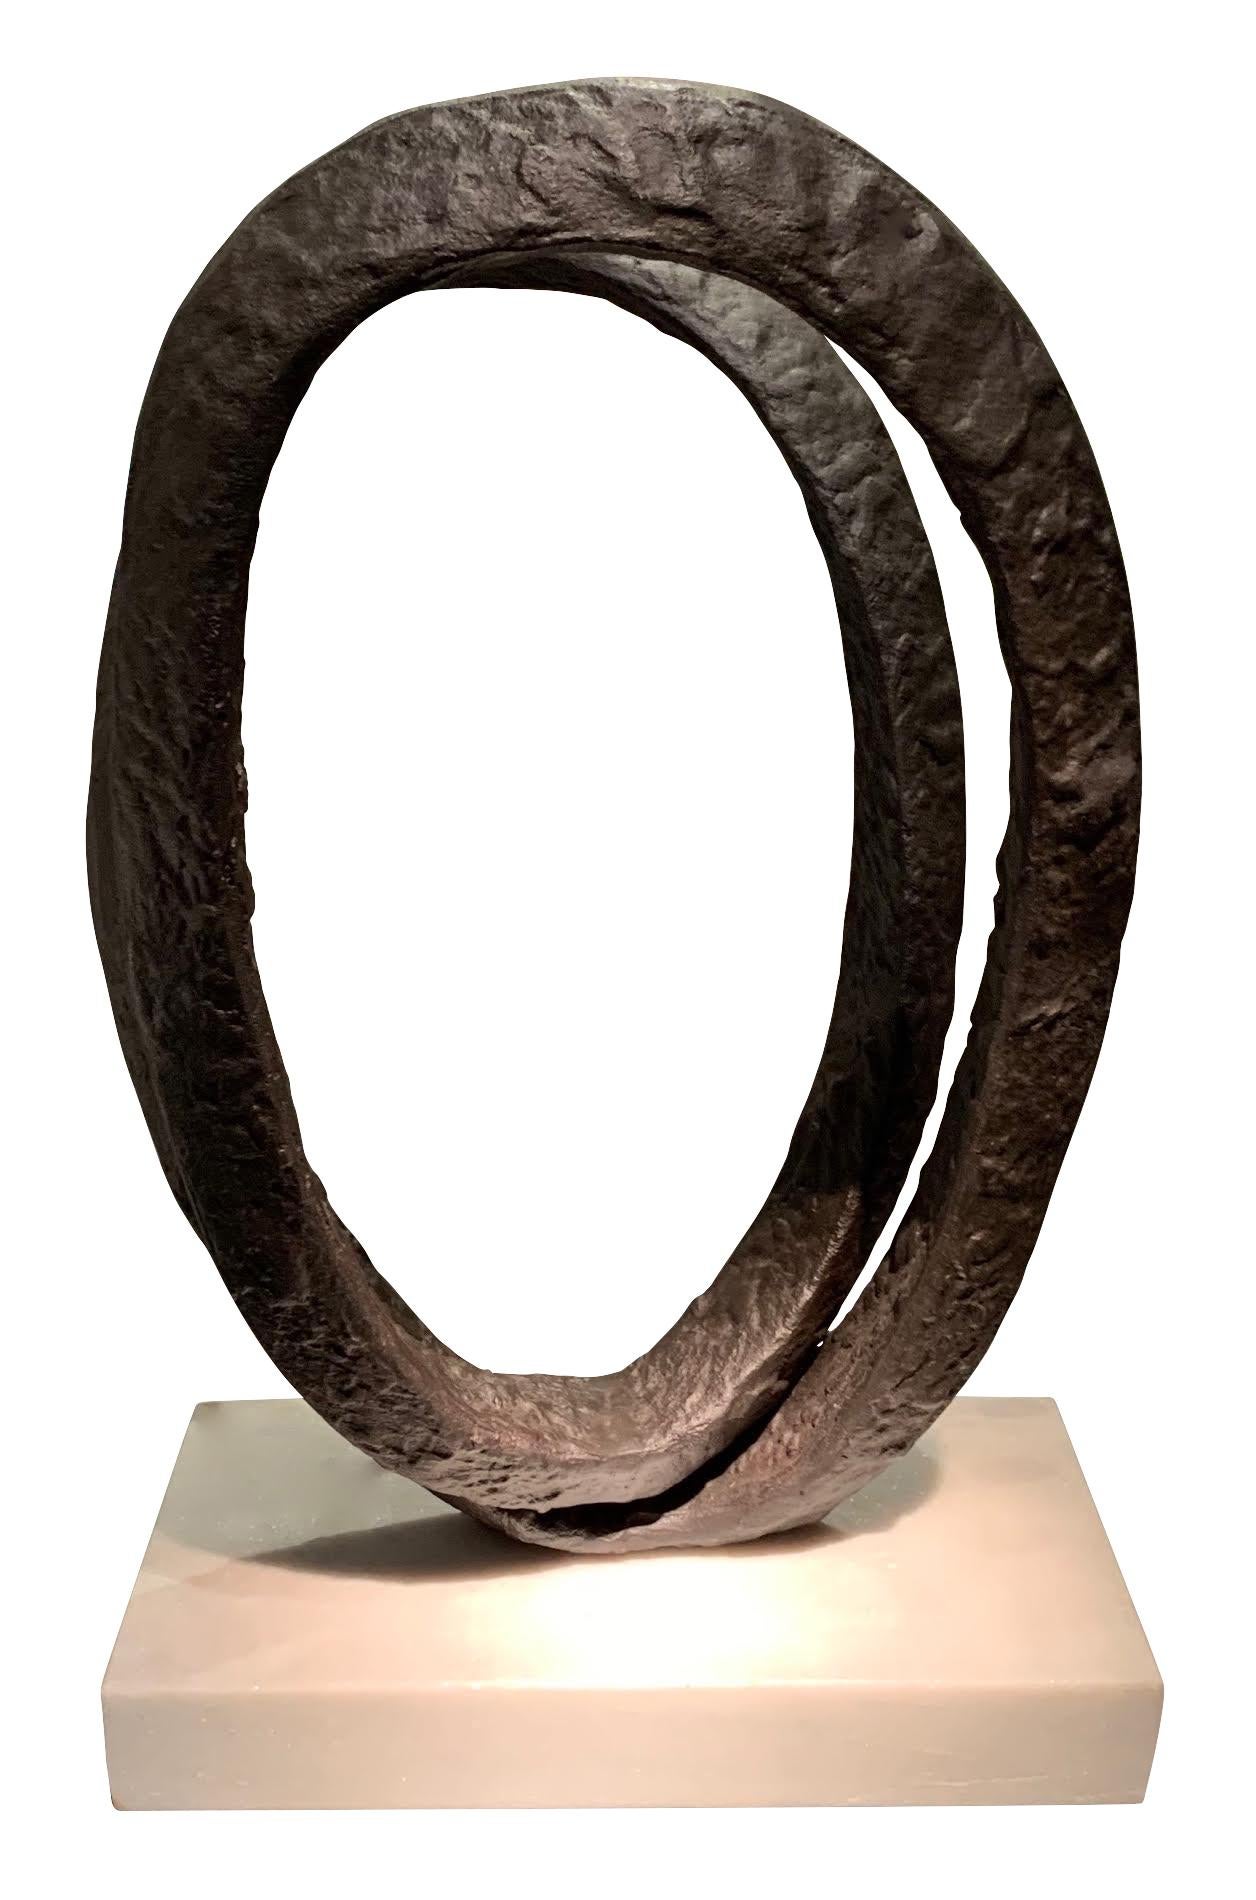 Contemporary Indonesian black hammered iron double ring 